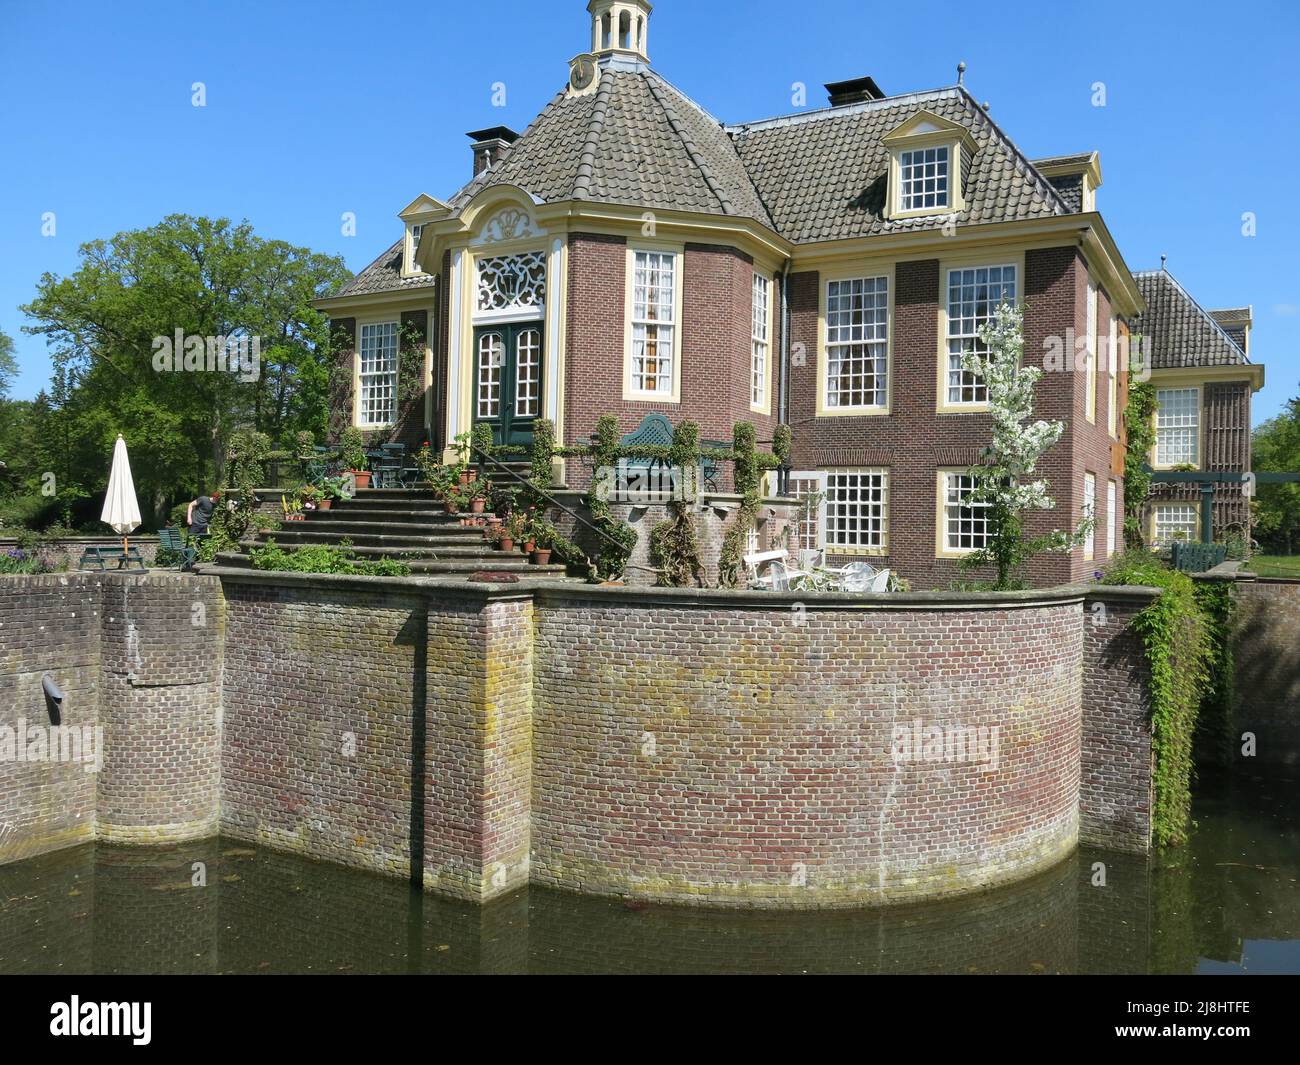 The moated manor house of De Wiersse, set within 40 acres of garden and landscaped parkland; Vorden, Gelderland, The Netherlands. Stock Photo